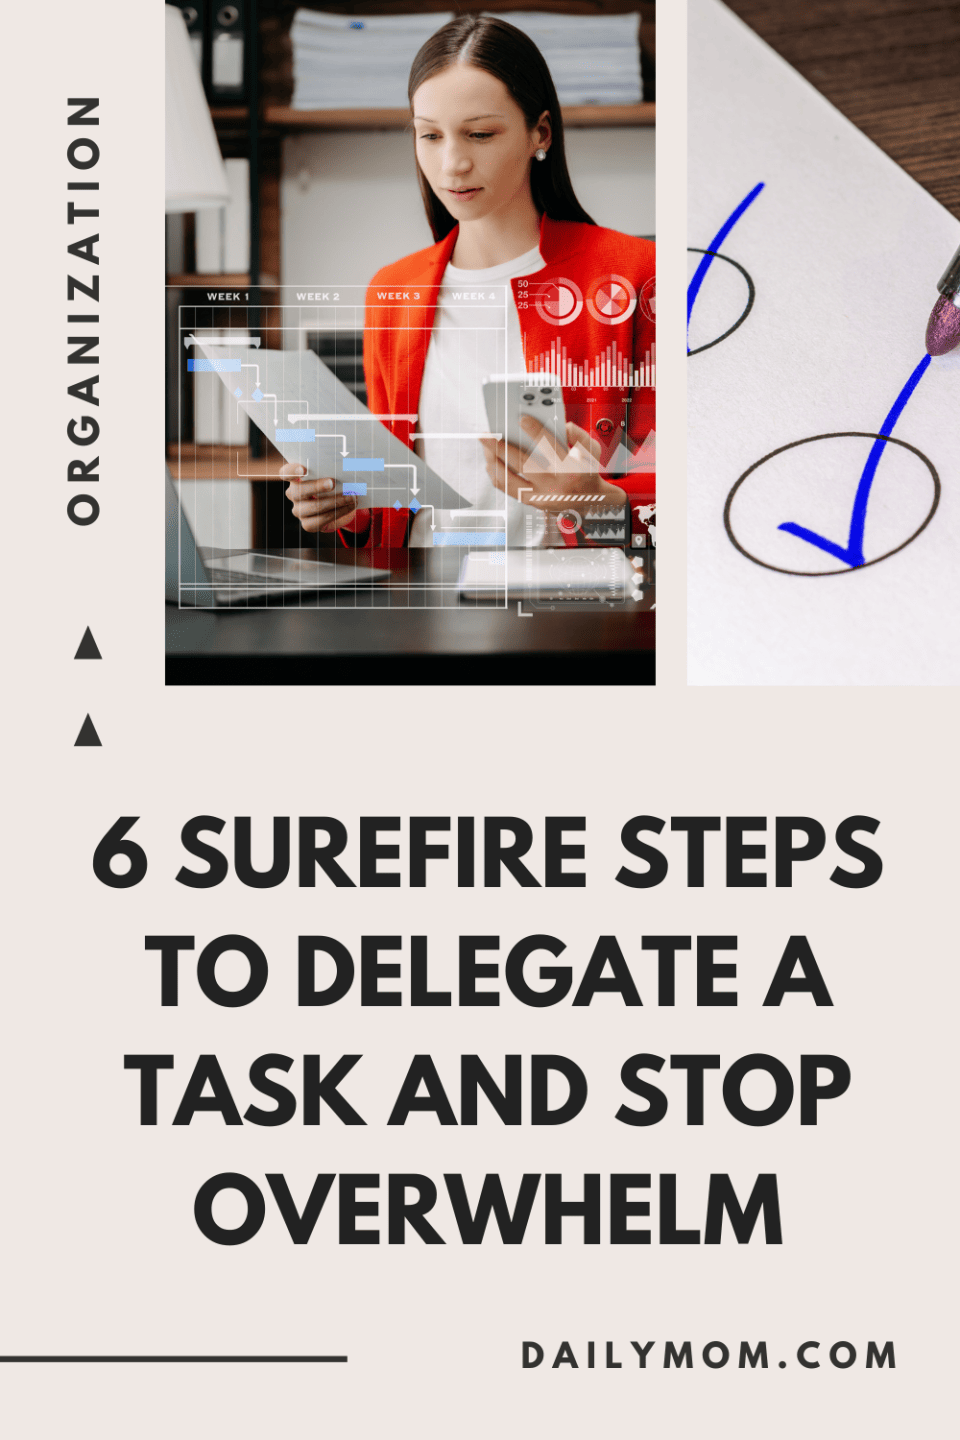 6 Surefire Steps To Delegate A Task And Stop Overwhelm